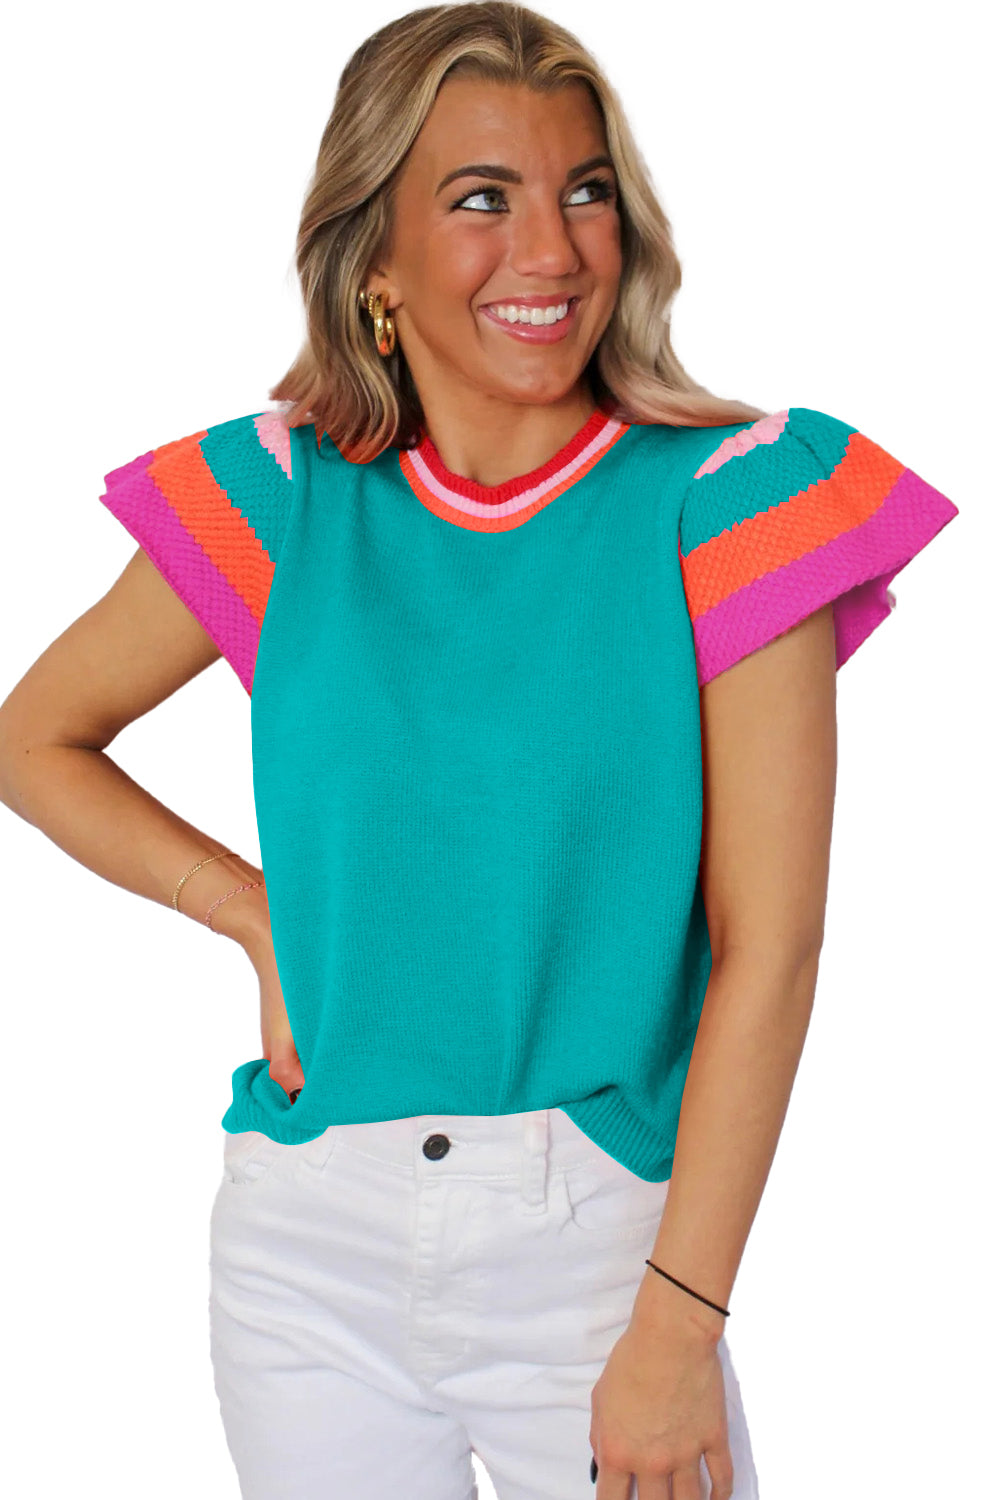 Turquoise Contrast Sleeve Striped Round Neck Knitted Tee